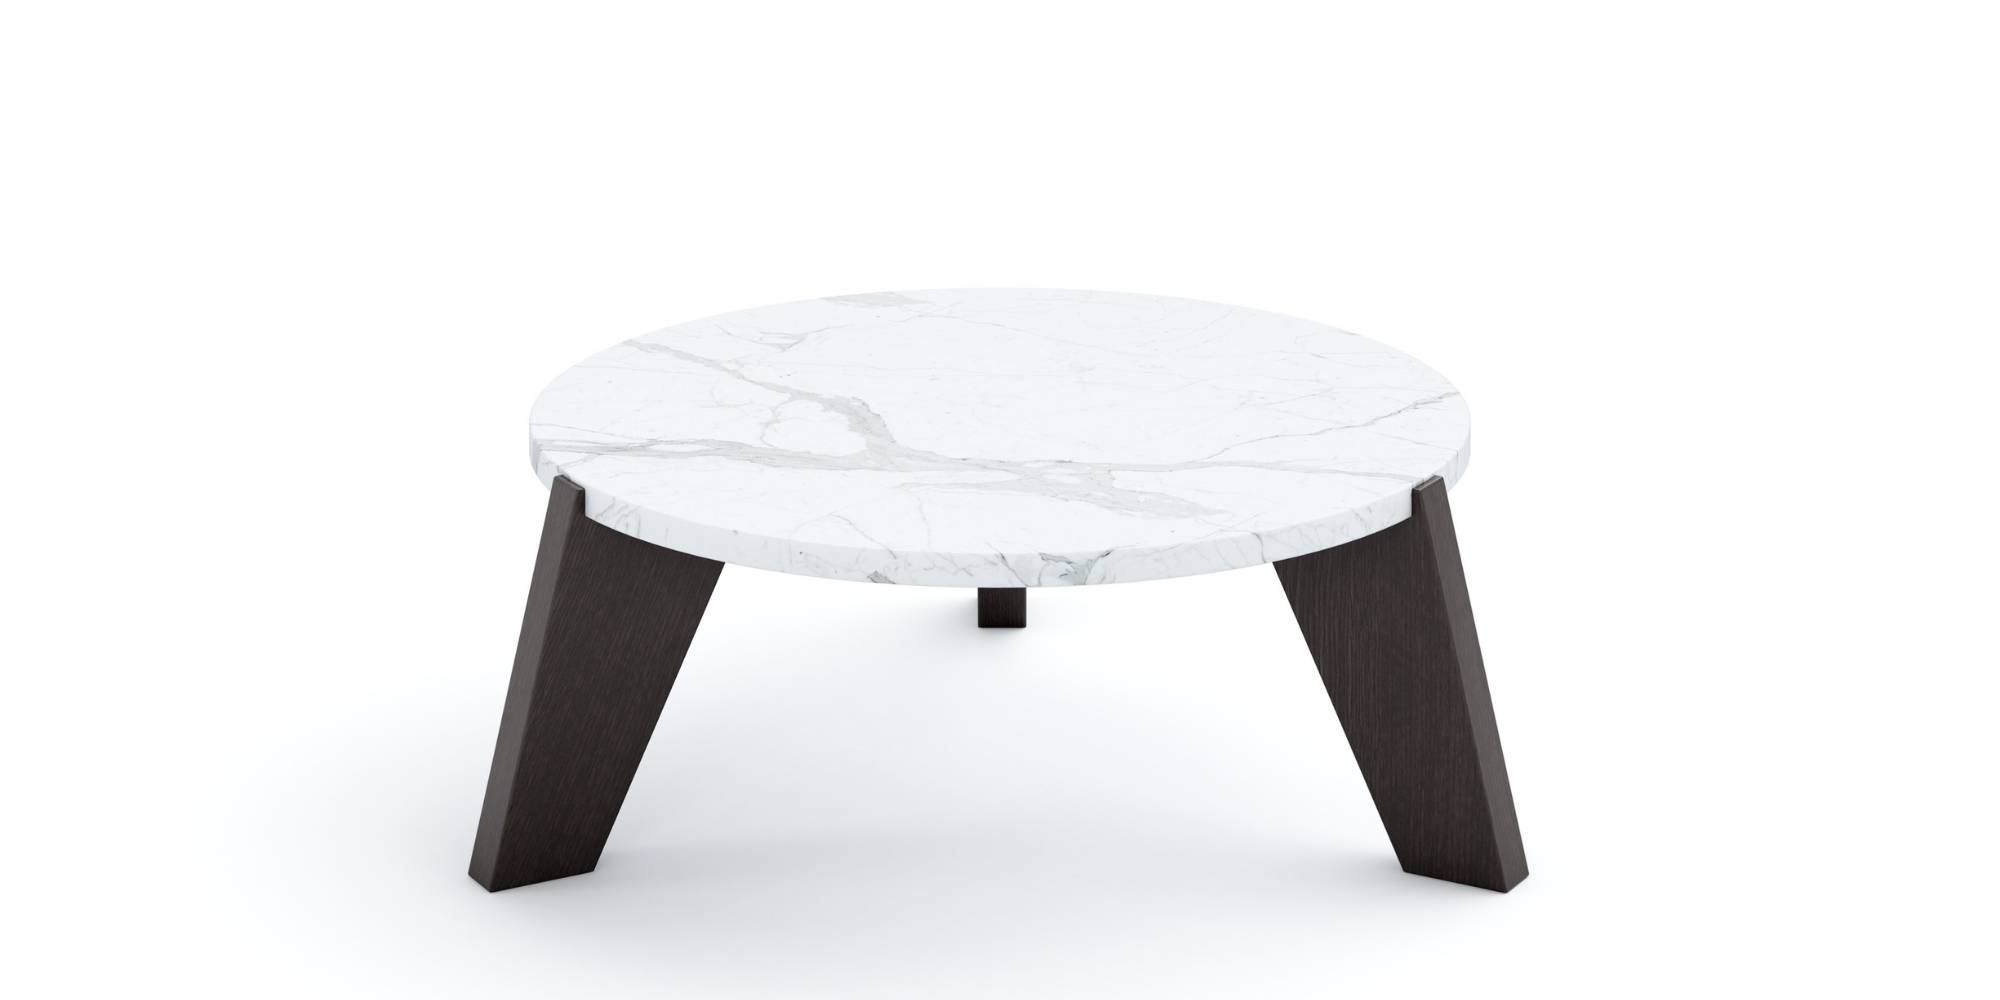 Tamarindo Round Coffee Table in Outdoor Tables Coffee Tables for Tamarindo collection